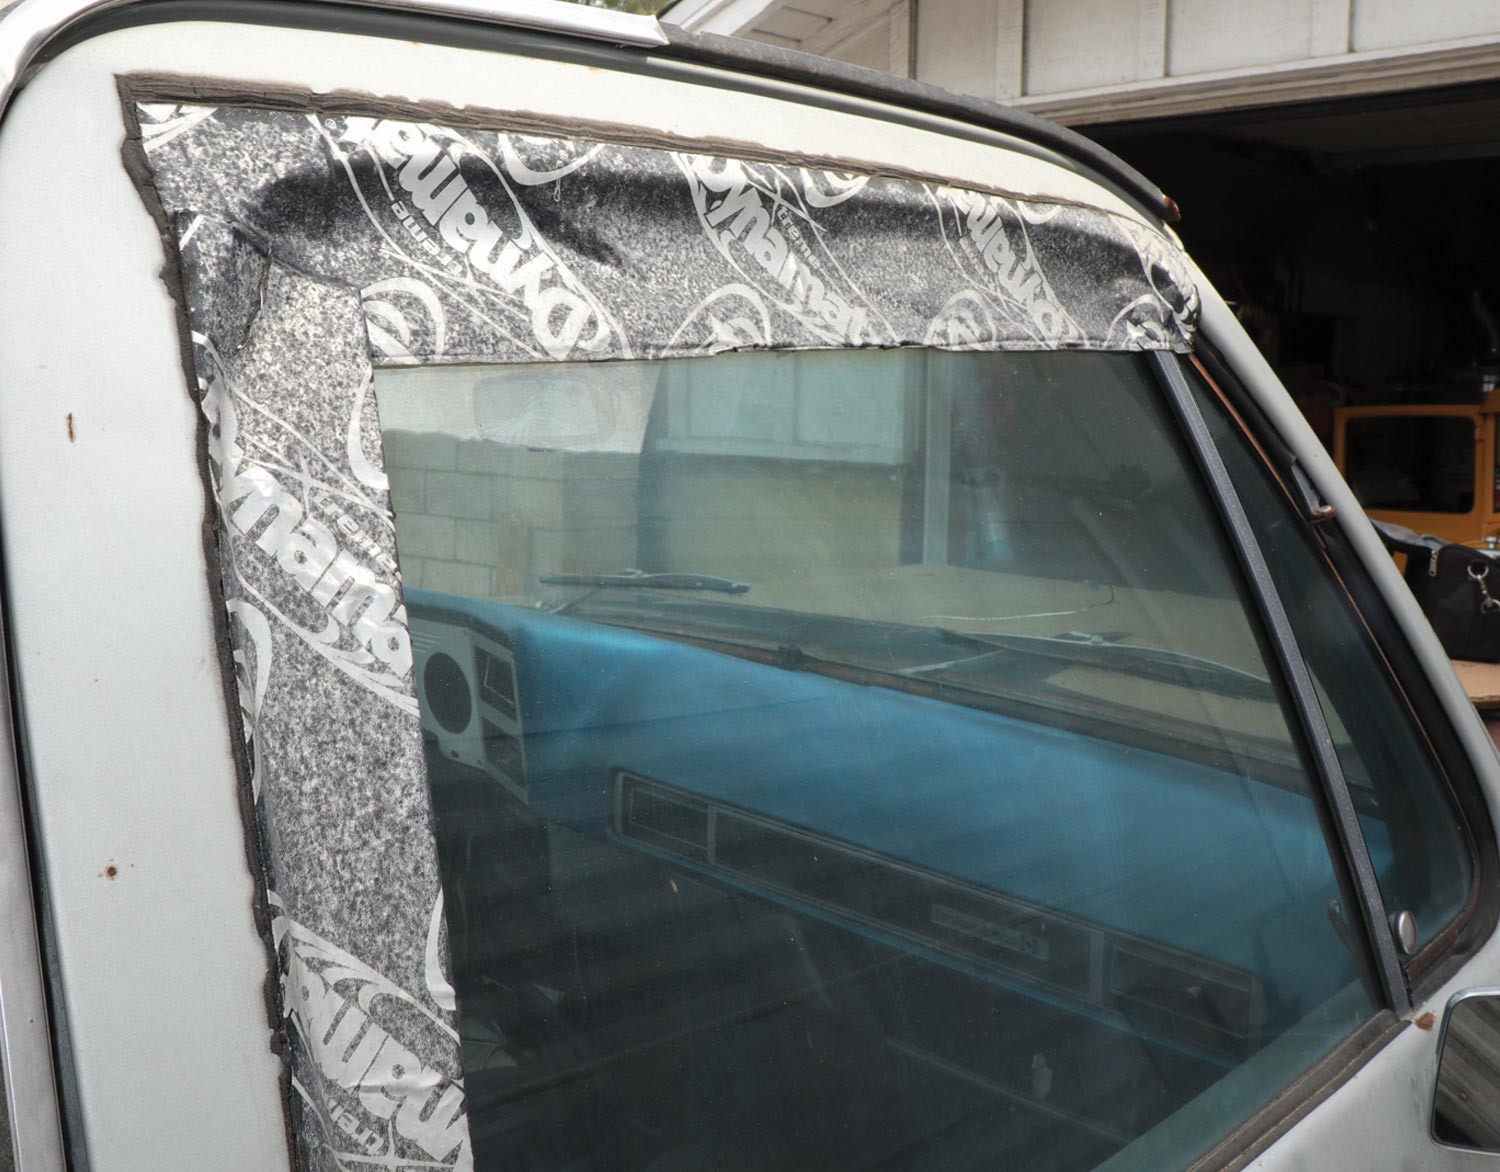 view of faded Dynamat Xtreme, once applied to a separate car window to keep rain water from seeping in